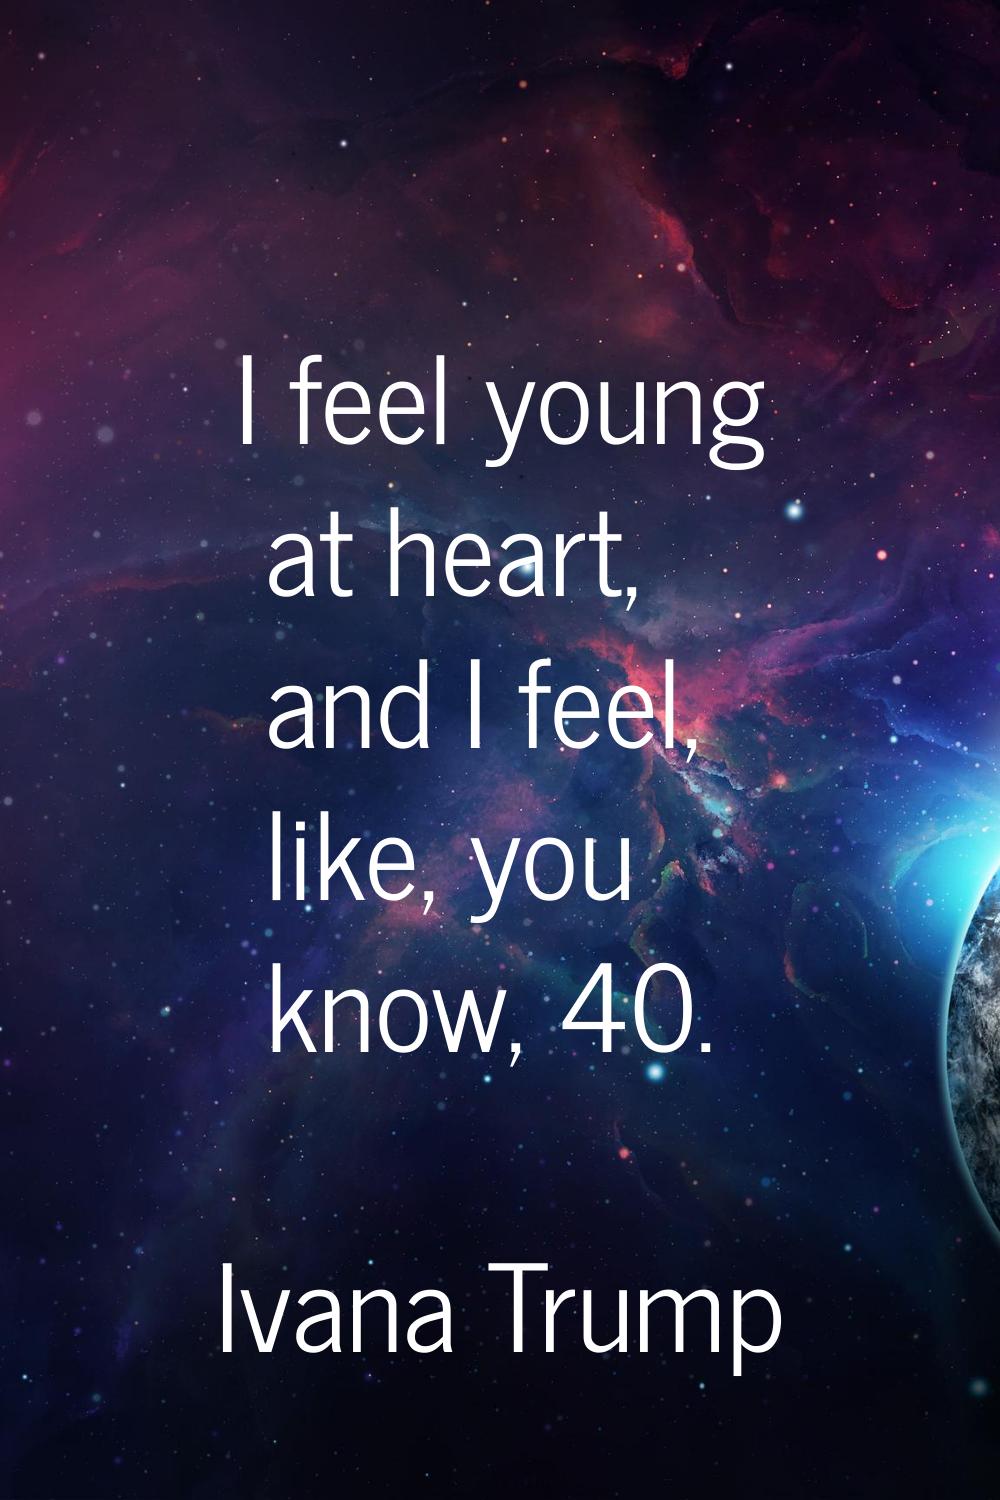 I feel young at heart, and I feel, like, you know, 40.